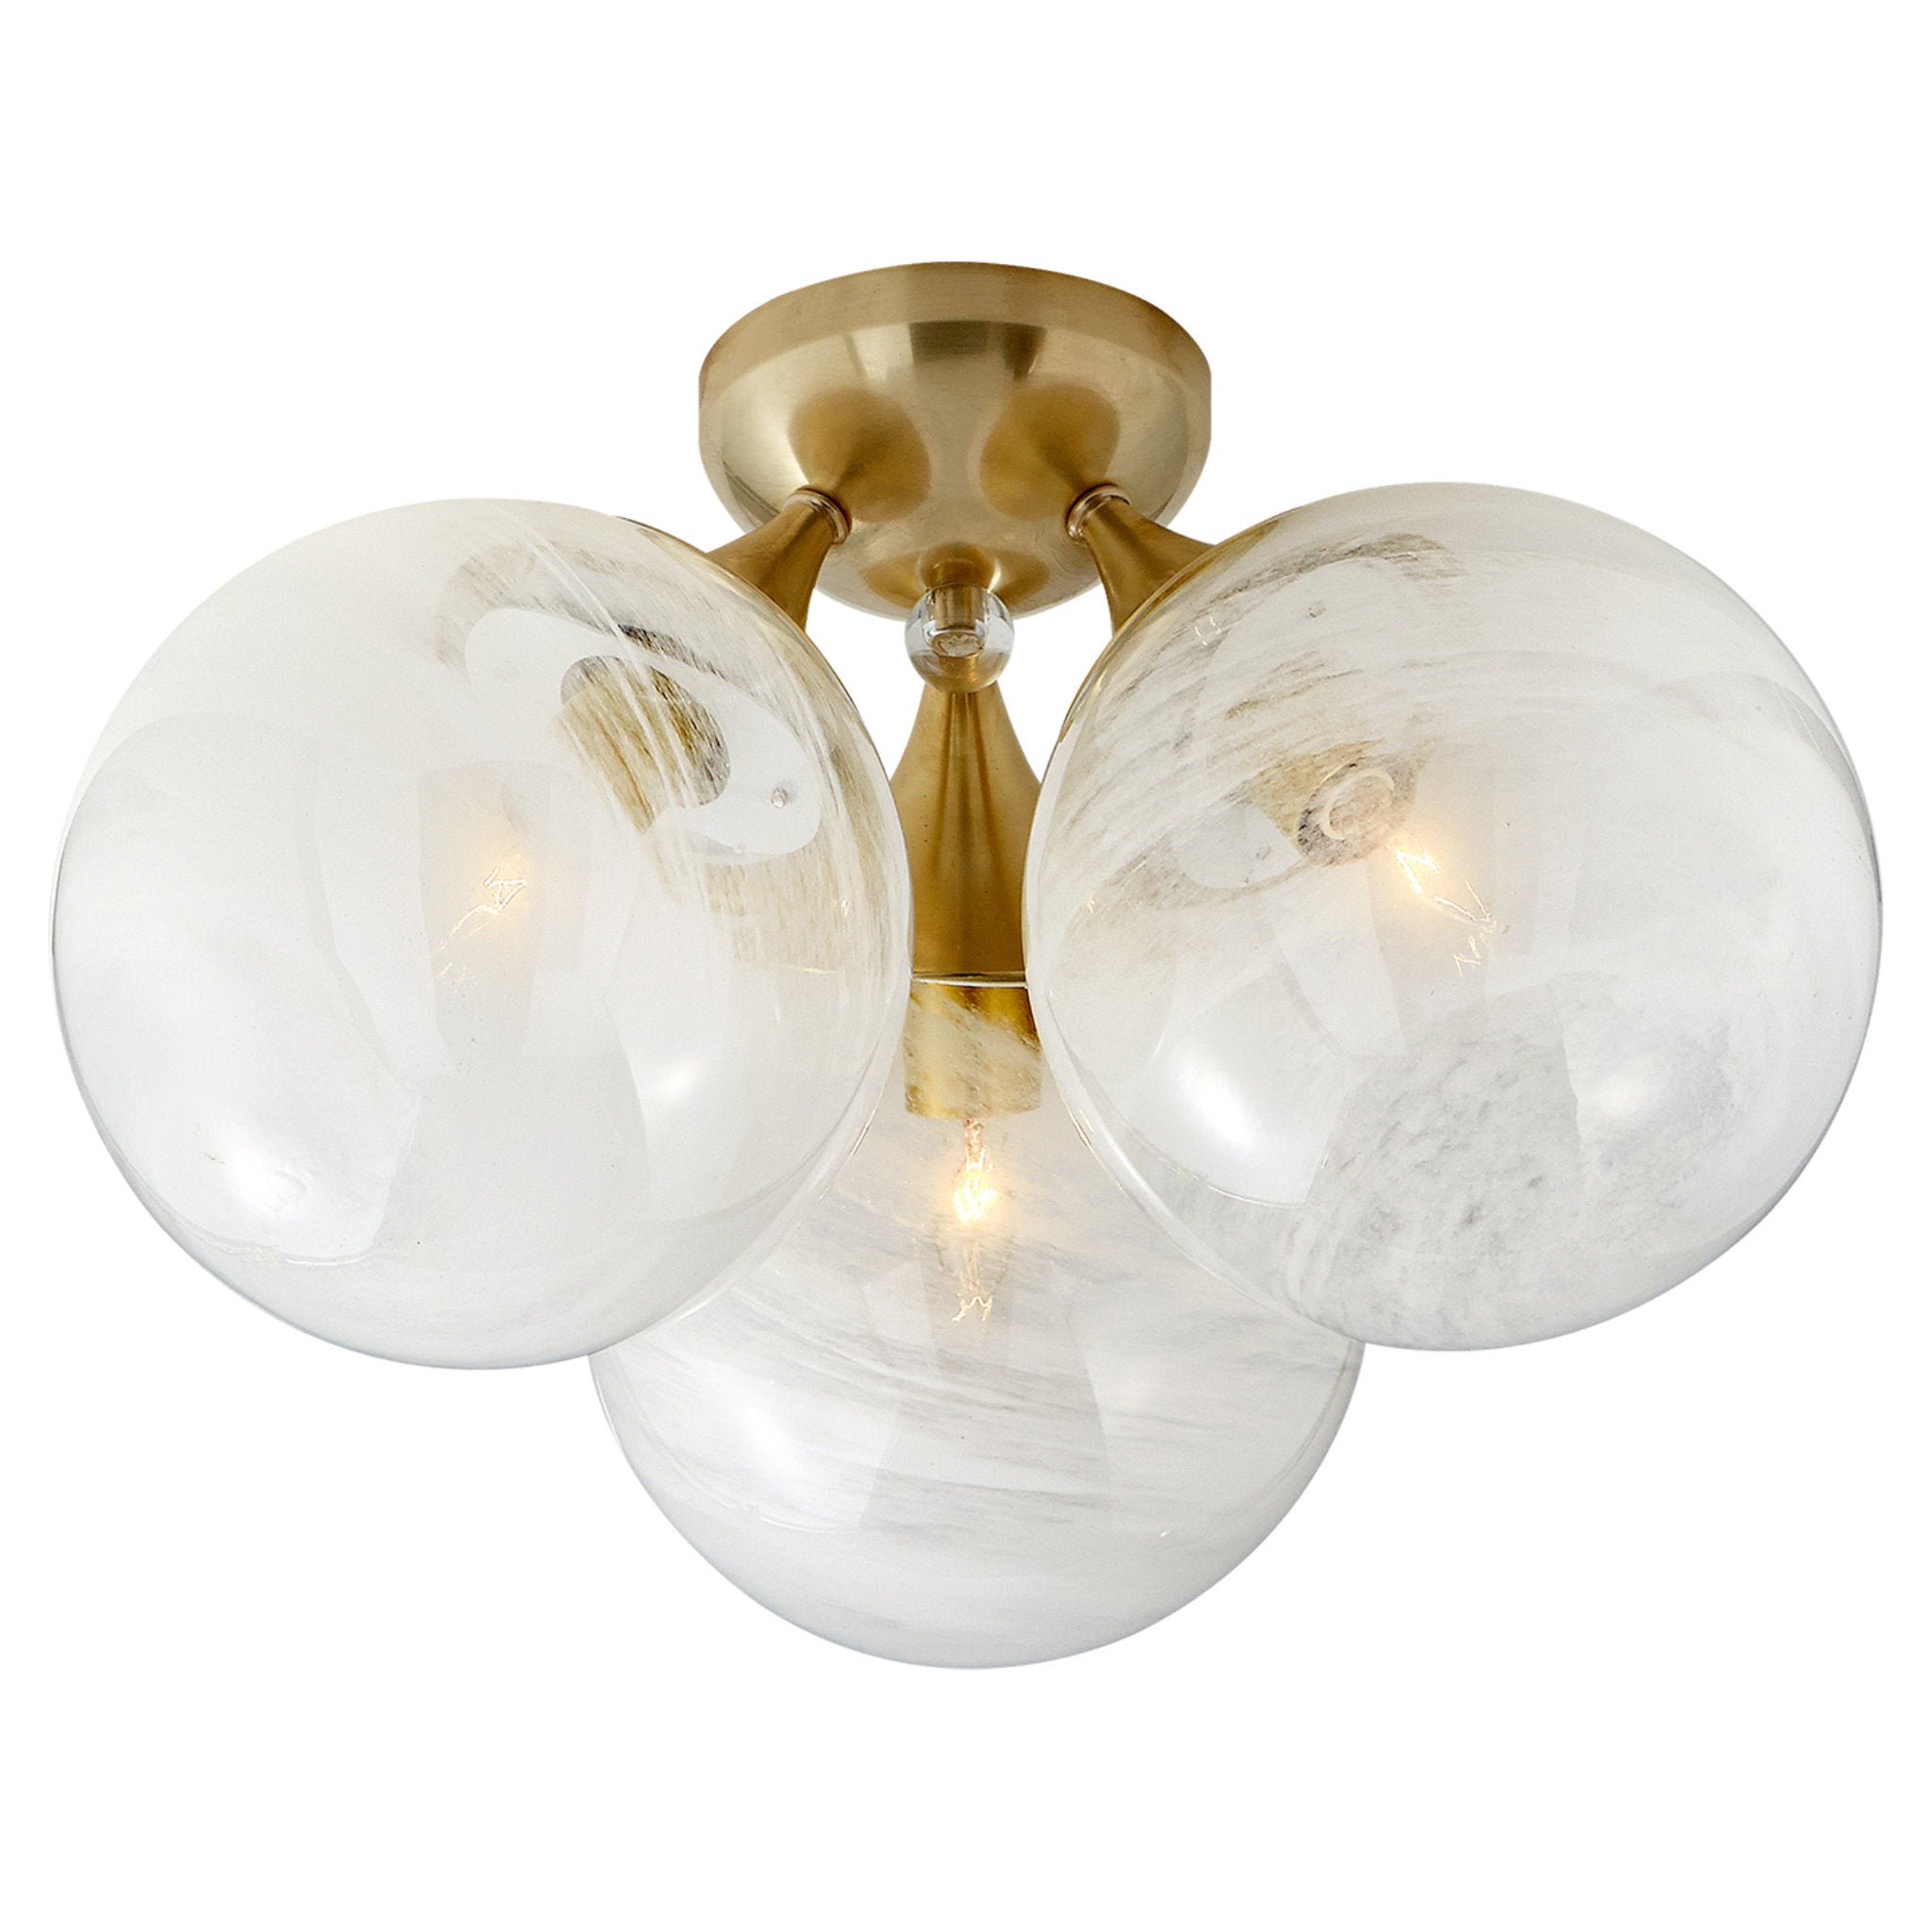 AERIN Cristol Large Triple Flush Mount in Hand-Rubbed Antique Brass with White Strie Glass